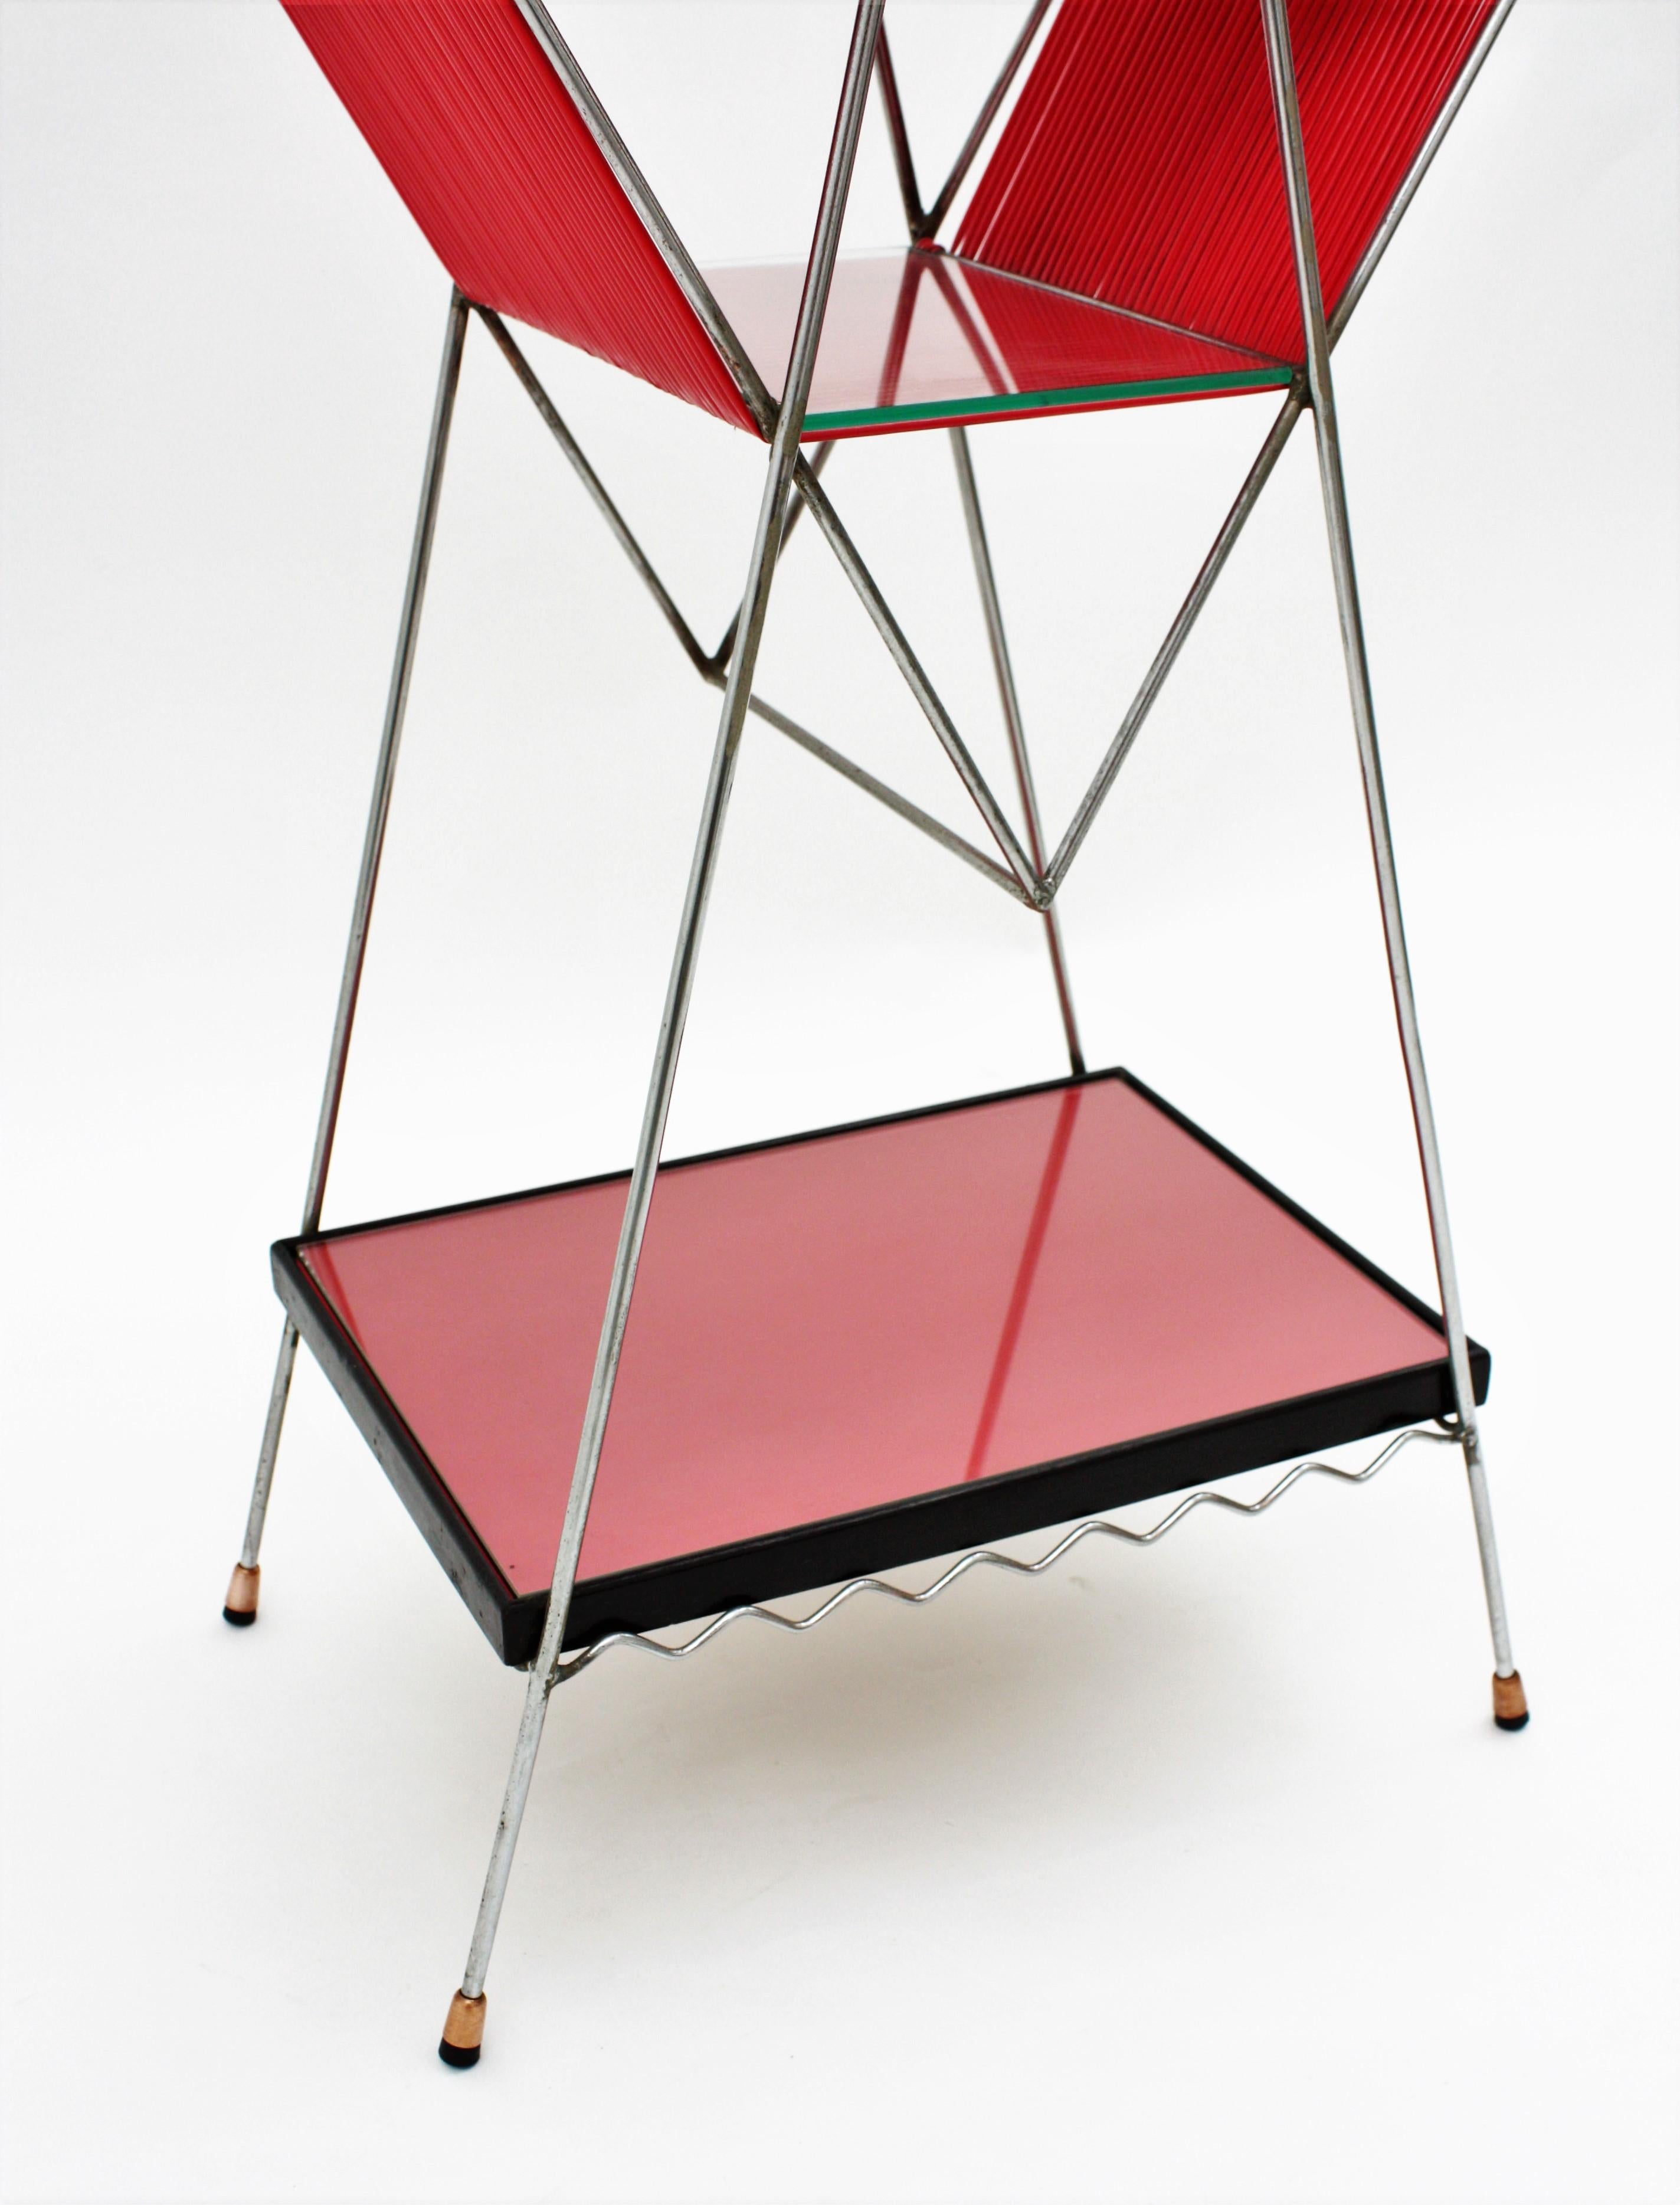 Mid-20th Century Mid-Century Modern Chrome and Red Scoubidou Side Table, France, 1950s